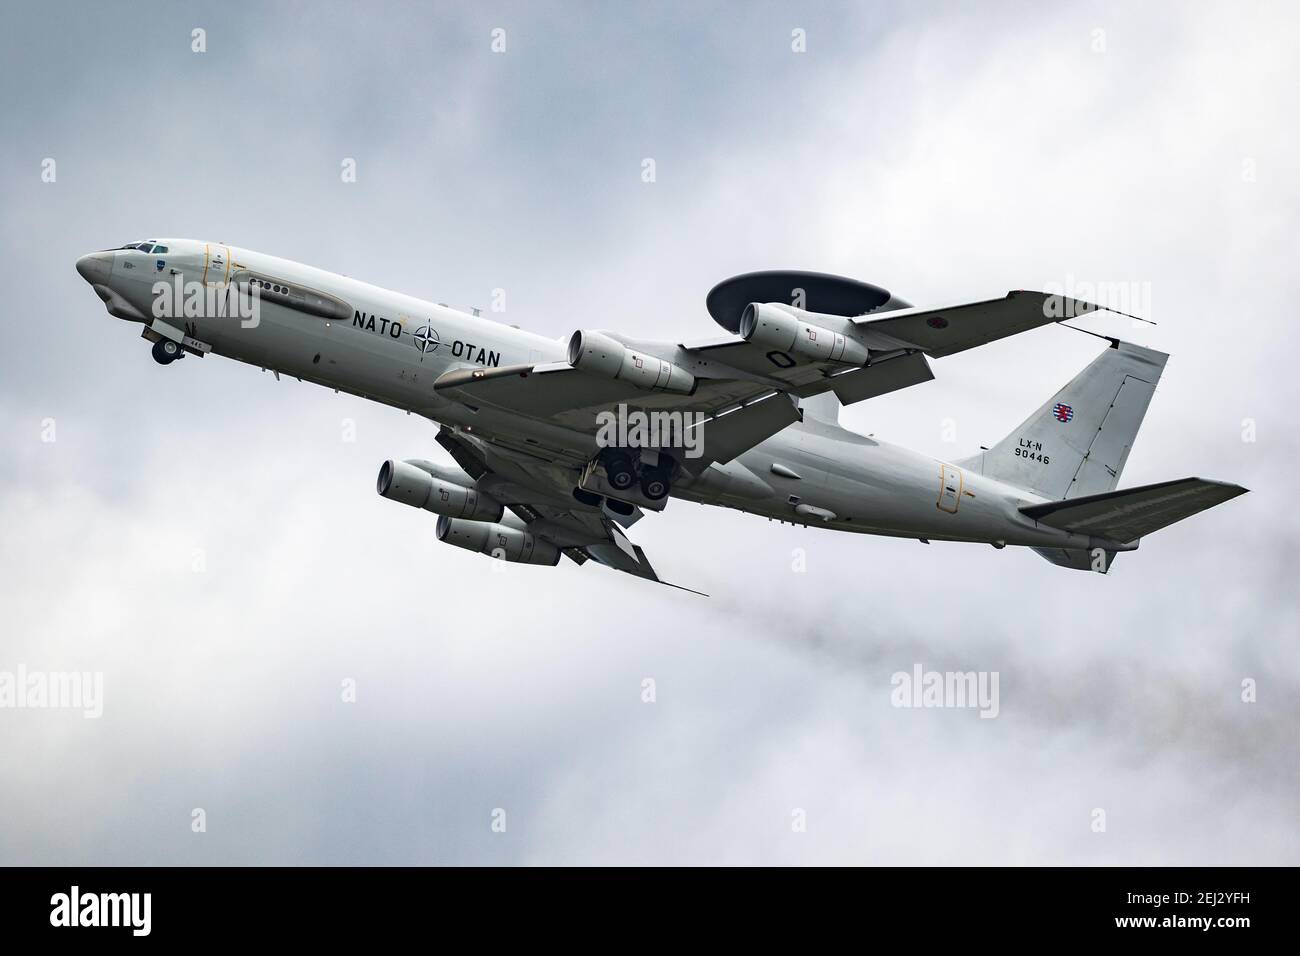 NATO Boeing E-3 Sentry AWACS radar plane performing a low-pass at the Eindhoven Airbase.  The Netherlands - July 3, 2020 Stock Photo